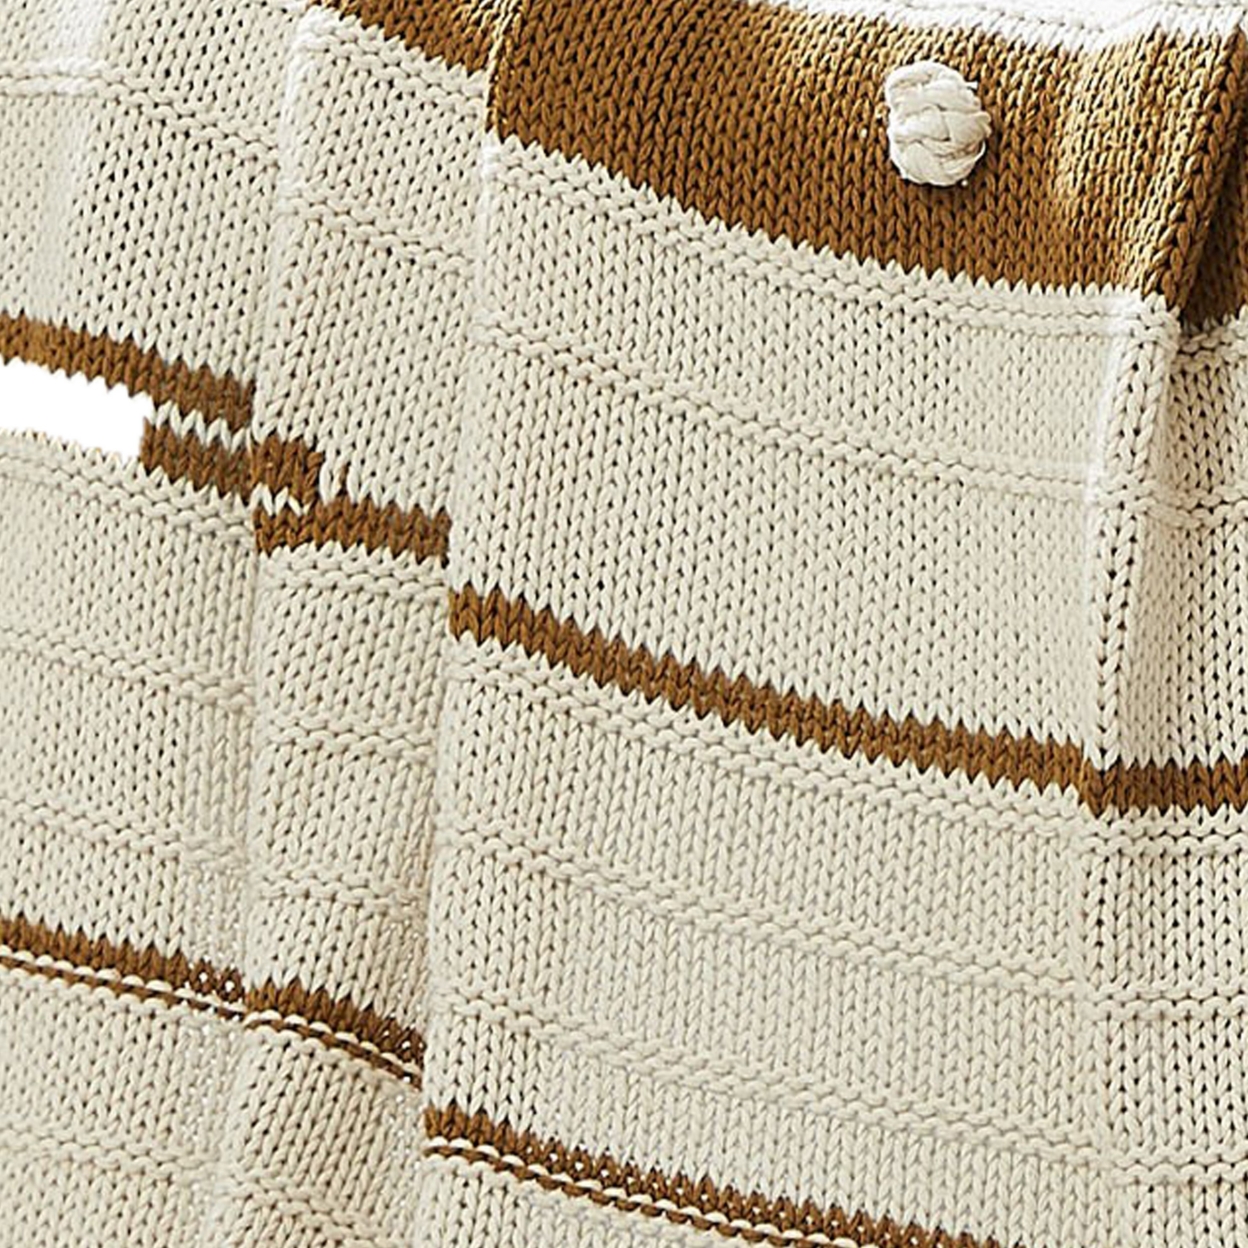 Kai 50 X 70 Throw Blanket With Fringes, Soft Knitted Cotton, Ivory, Gold- Saltoro Sherpi